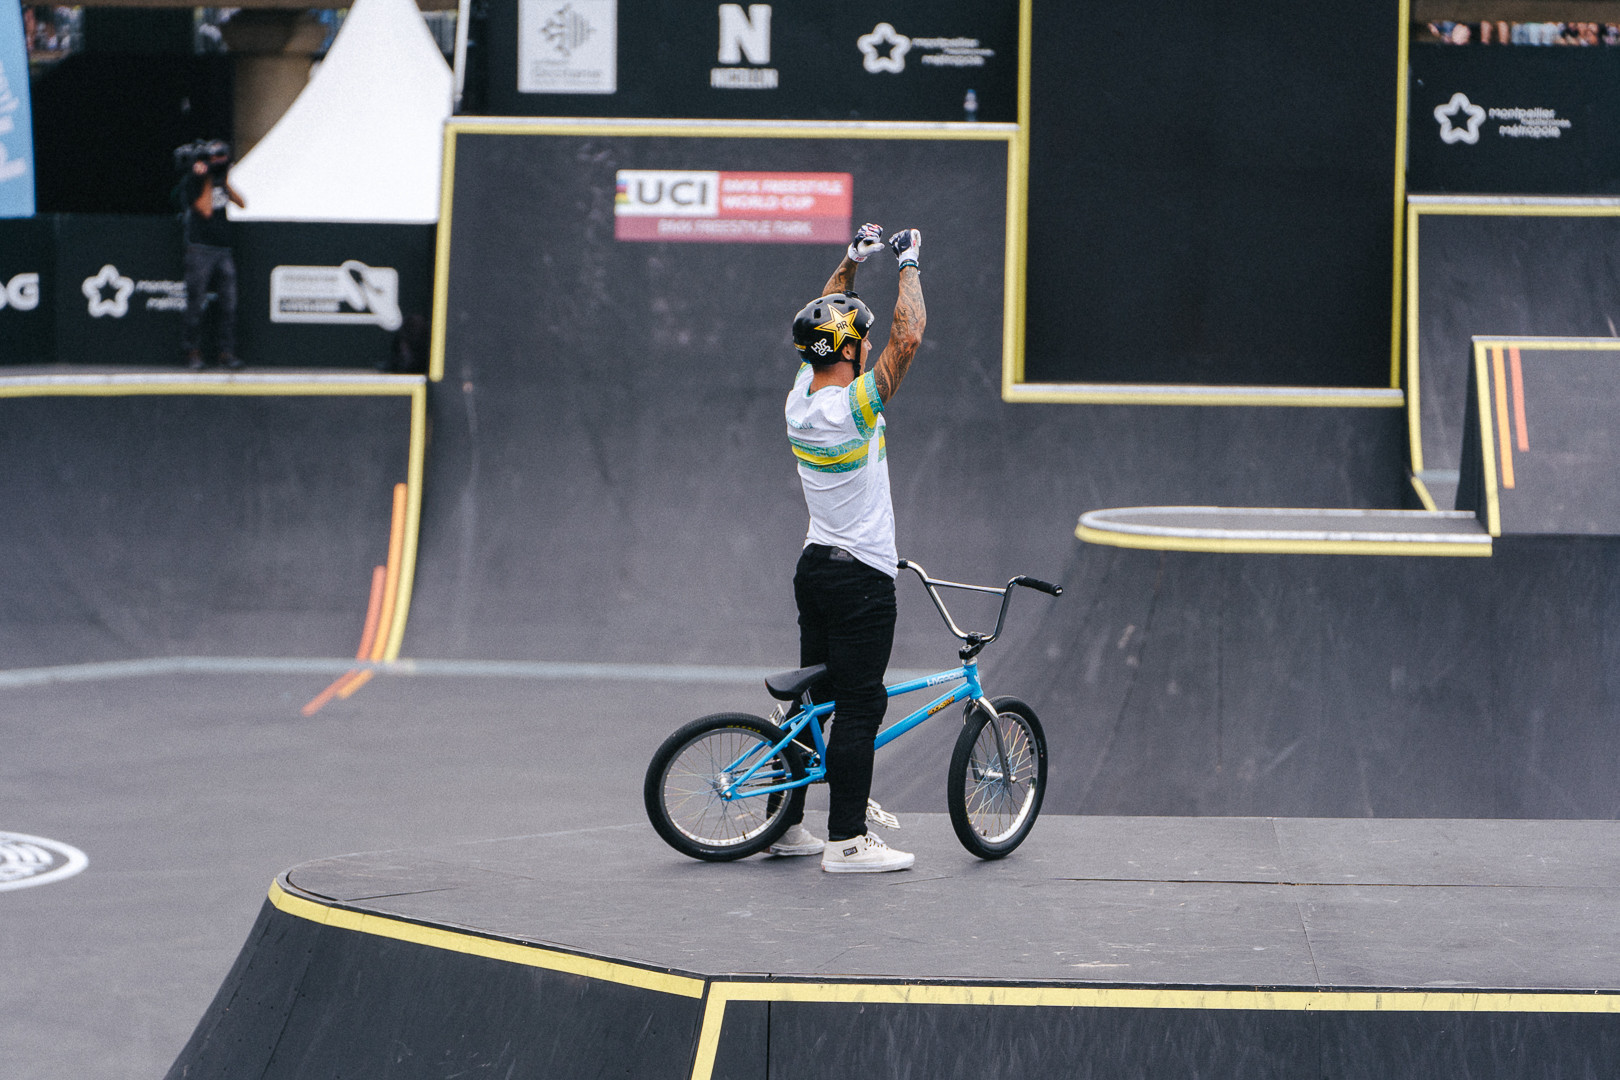 Tokyo 2020 champion Martin seals BMX freestyle gold once again at FISE Montpellier